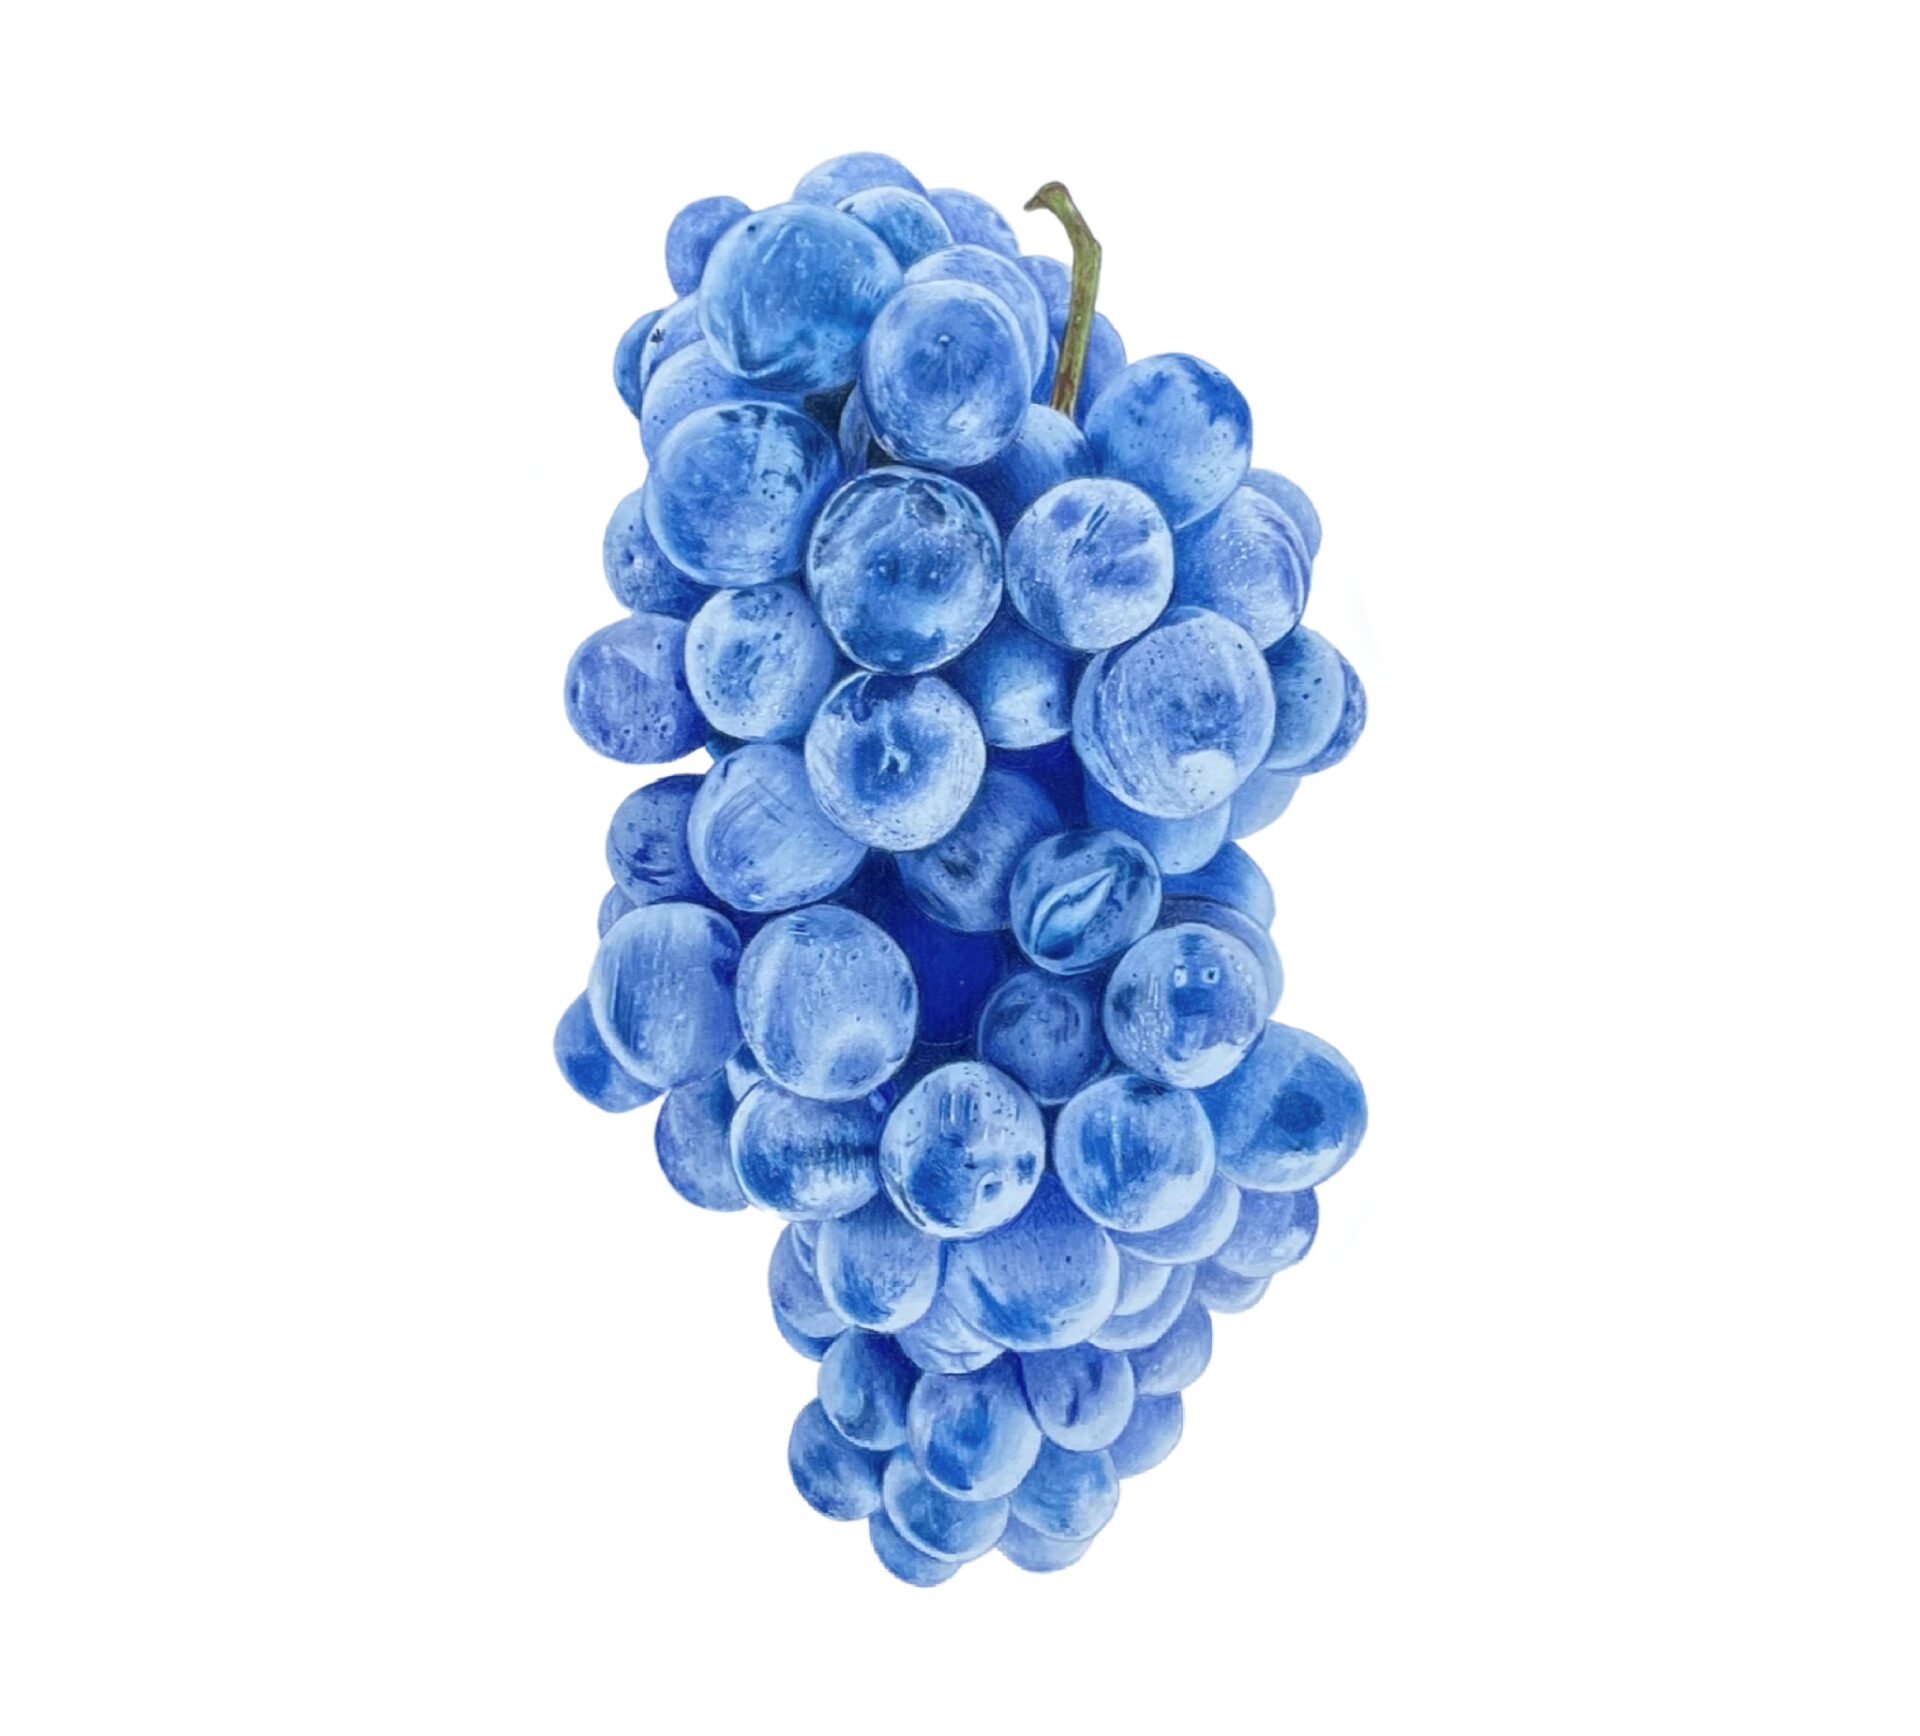 Colored Pencil Drawing of Blue Grapes